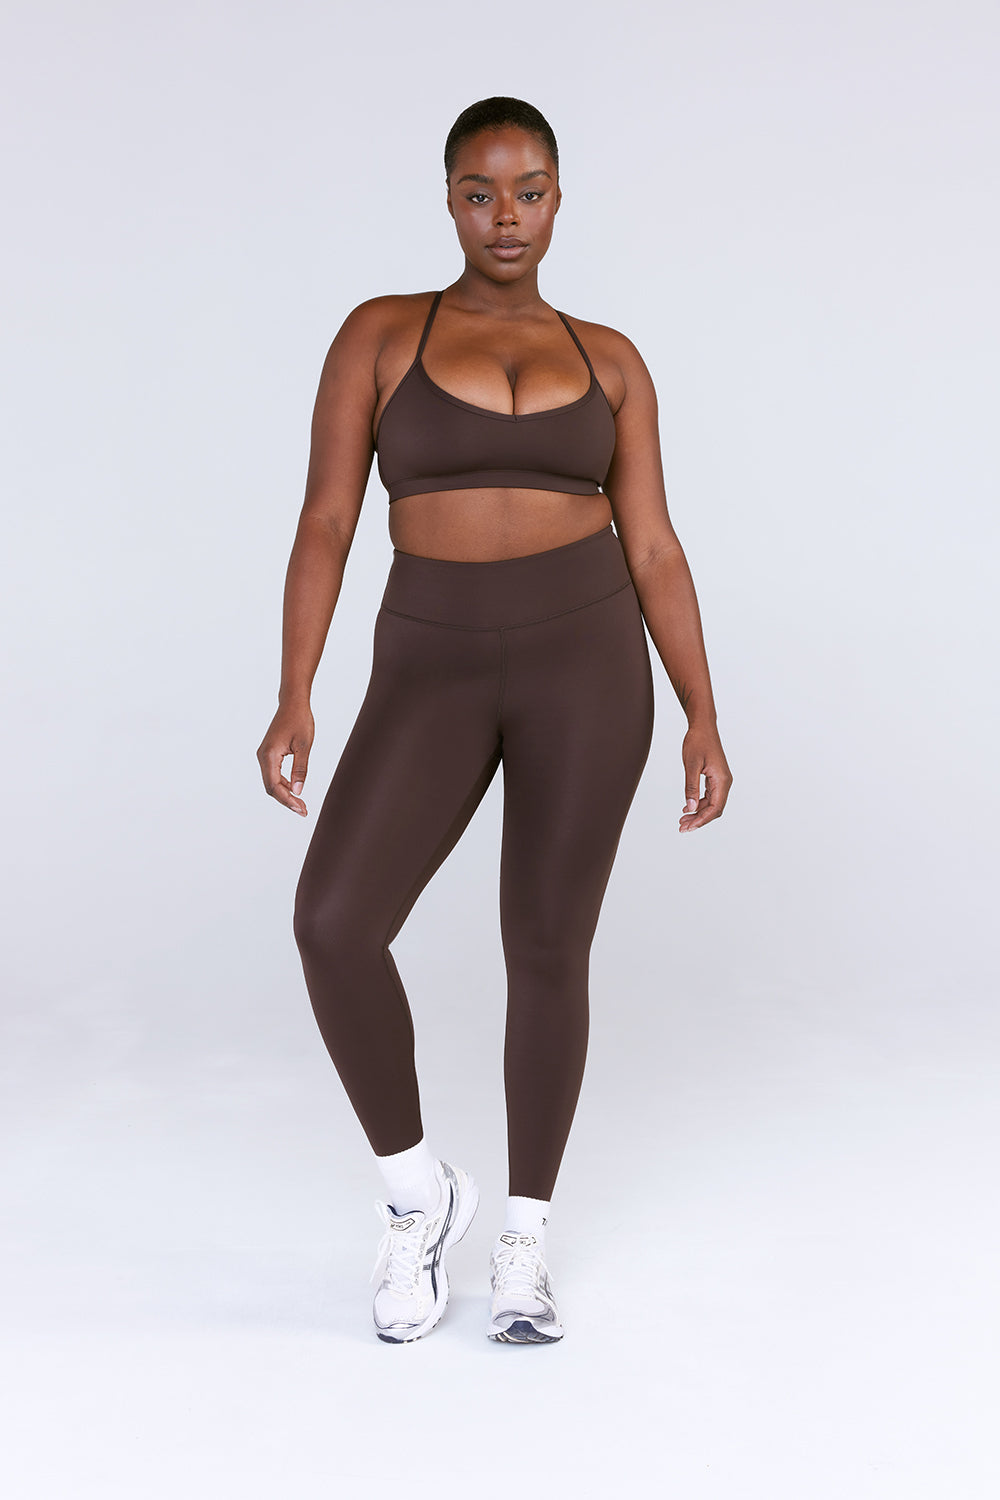 SCULPT Flare Leggings - Espresso, High Waisted, Squat Proof, 5 Star Rated